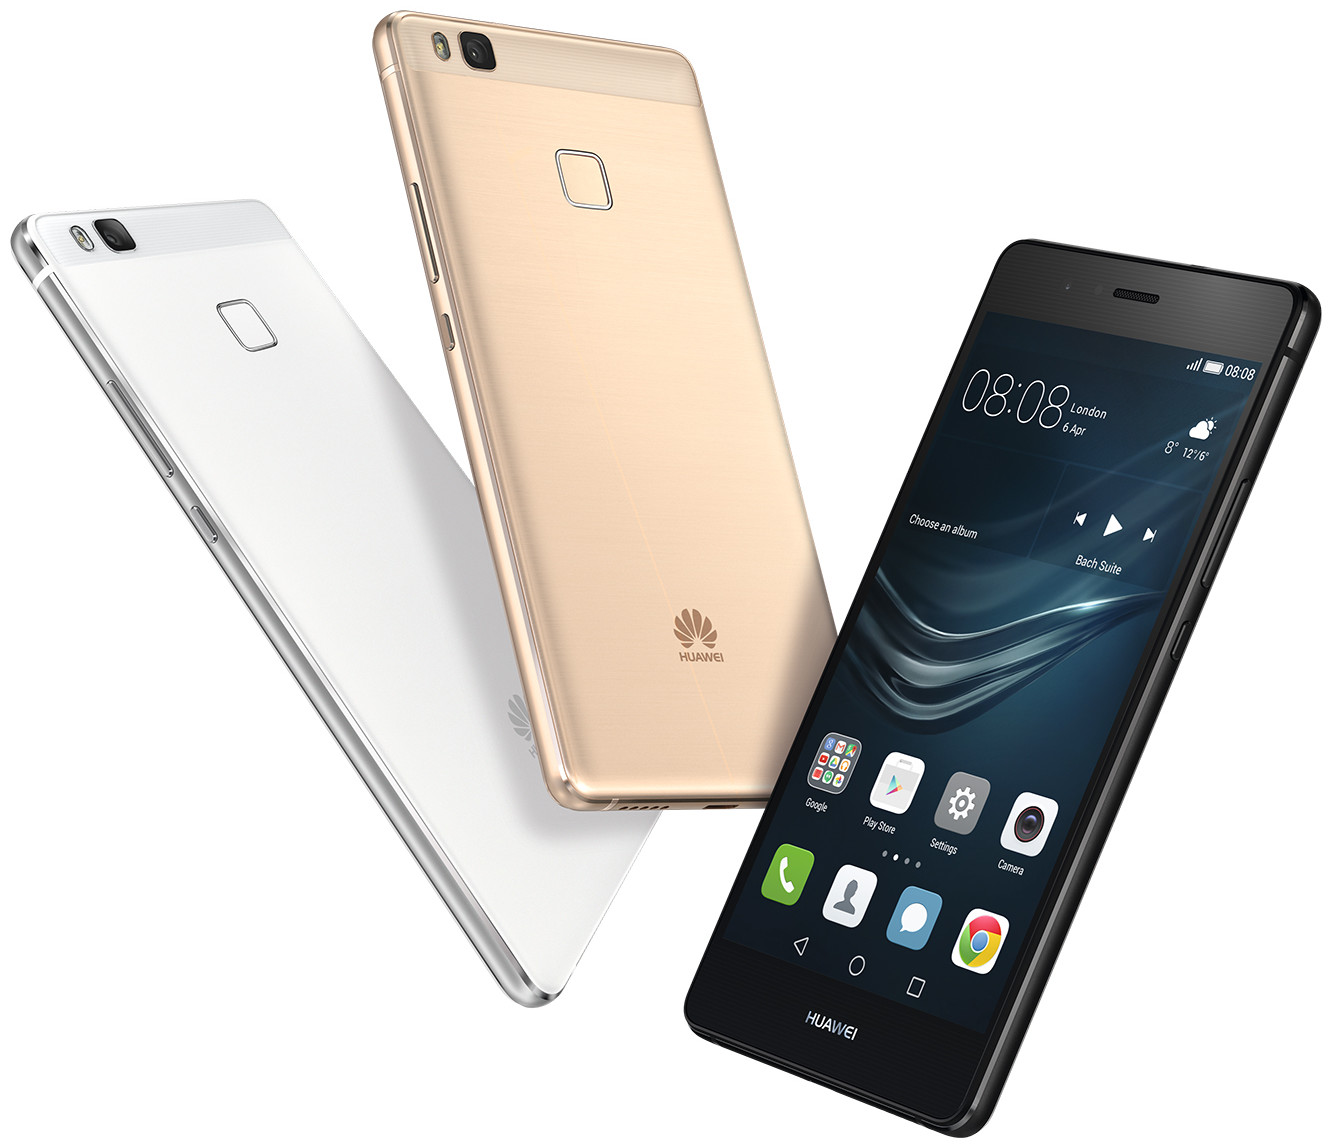 Druif afstand ding Huawei P9 Lite VNS-L22 3GB RAM - Specs and Price - Phonegg